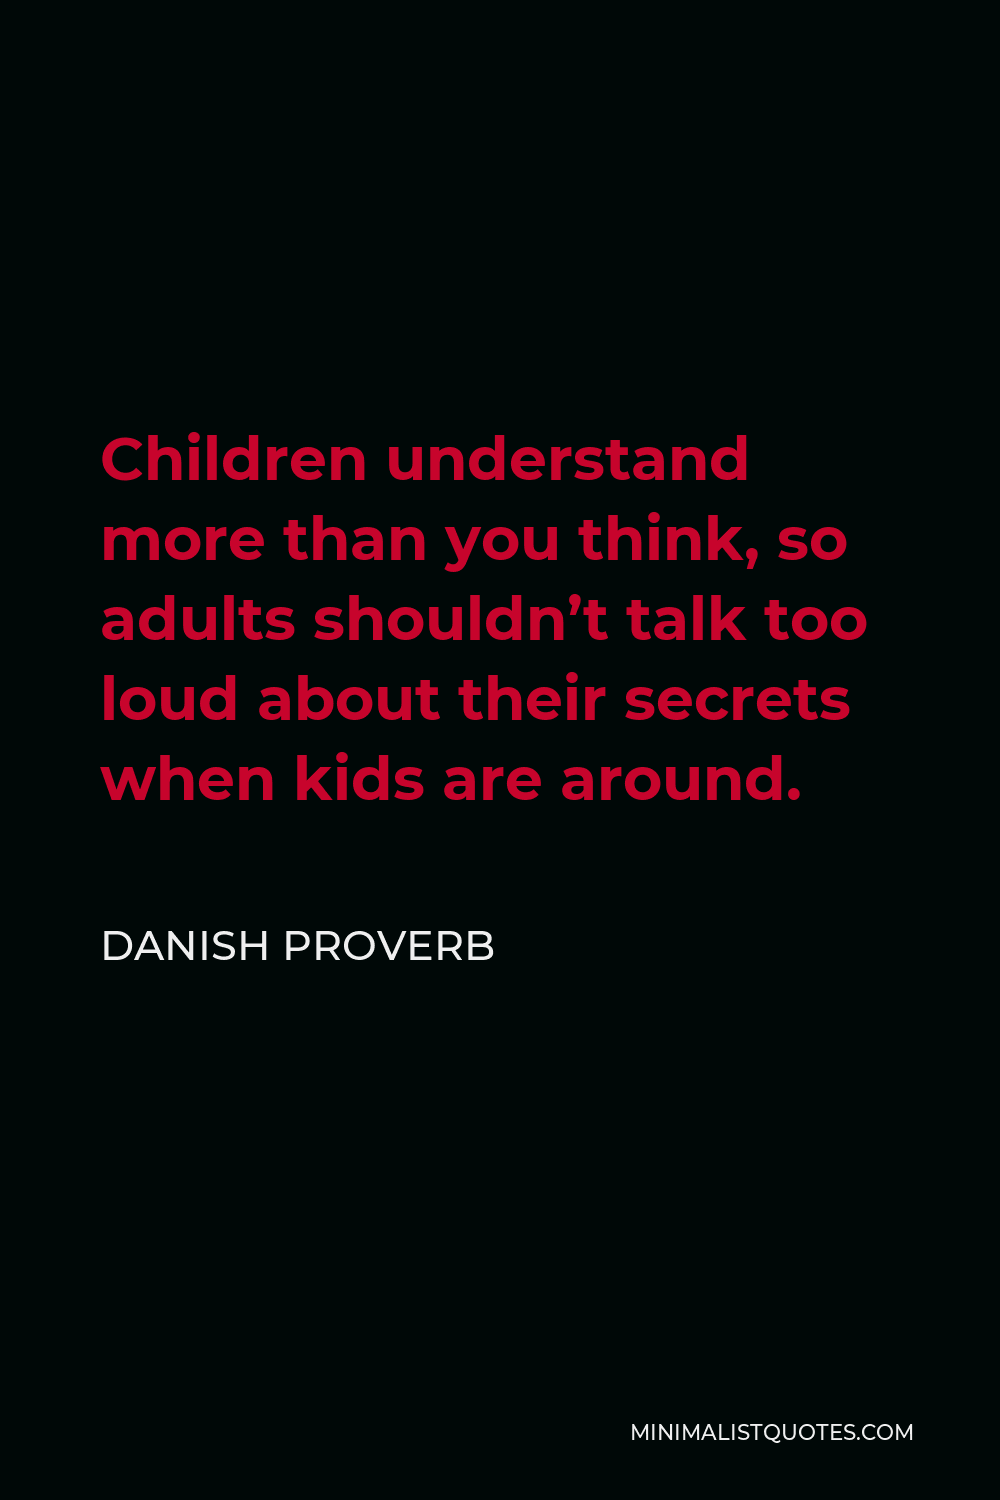 Danish Proverb Quote - Children understand more than you think, so adults shouldn’t talk too loud about their secrets when kids are around.